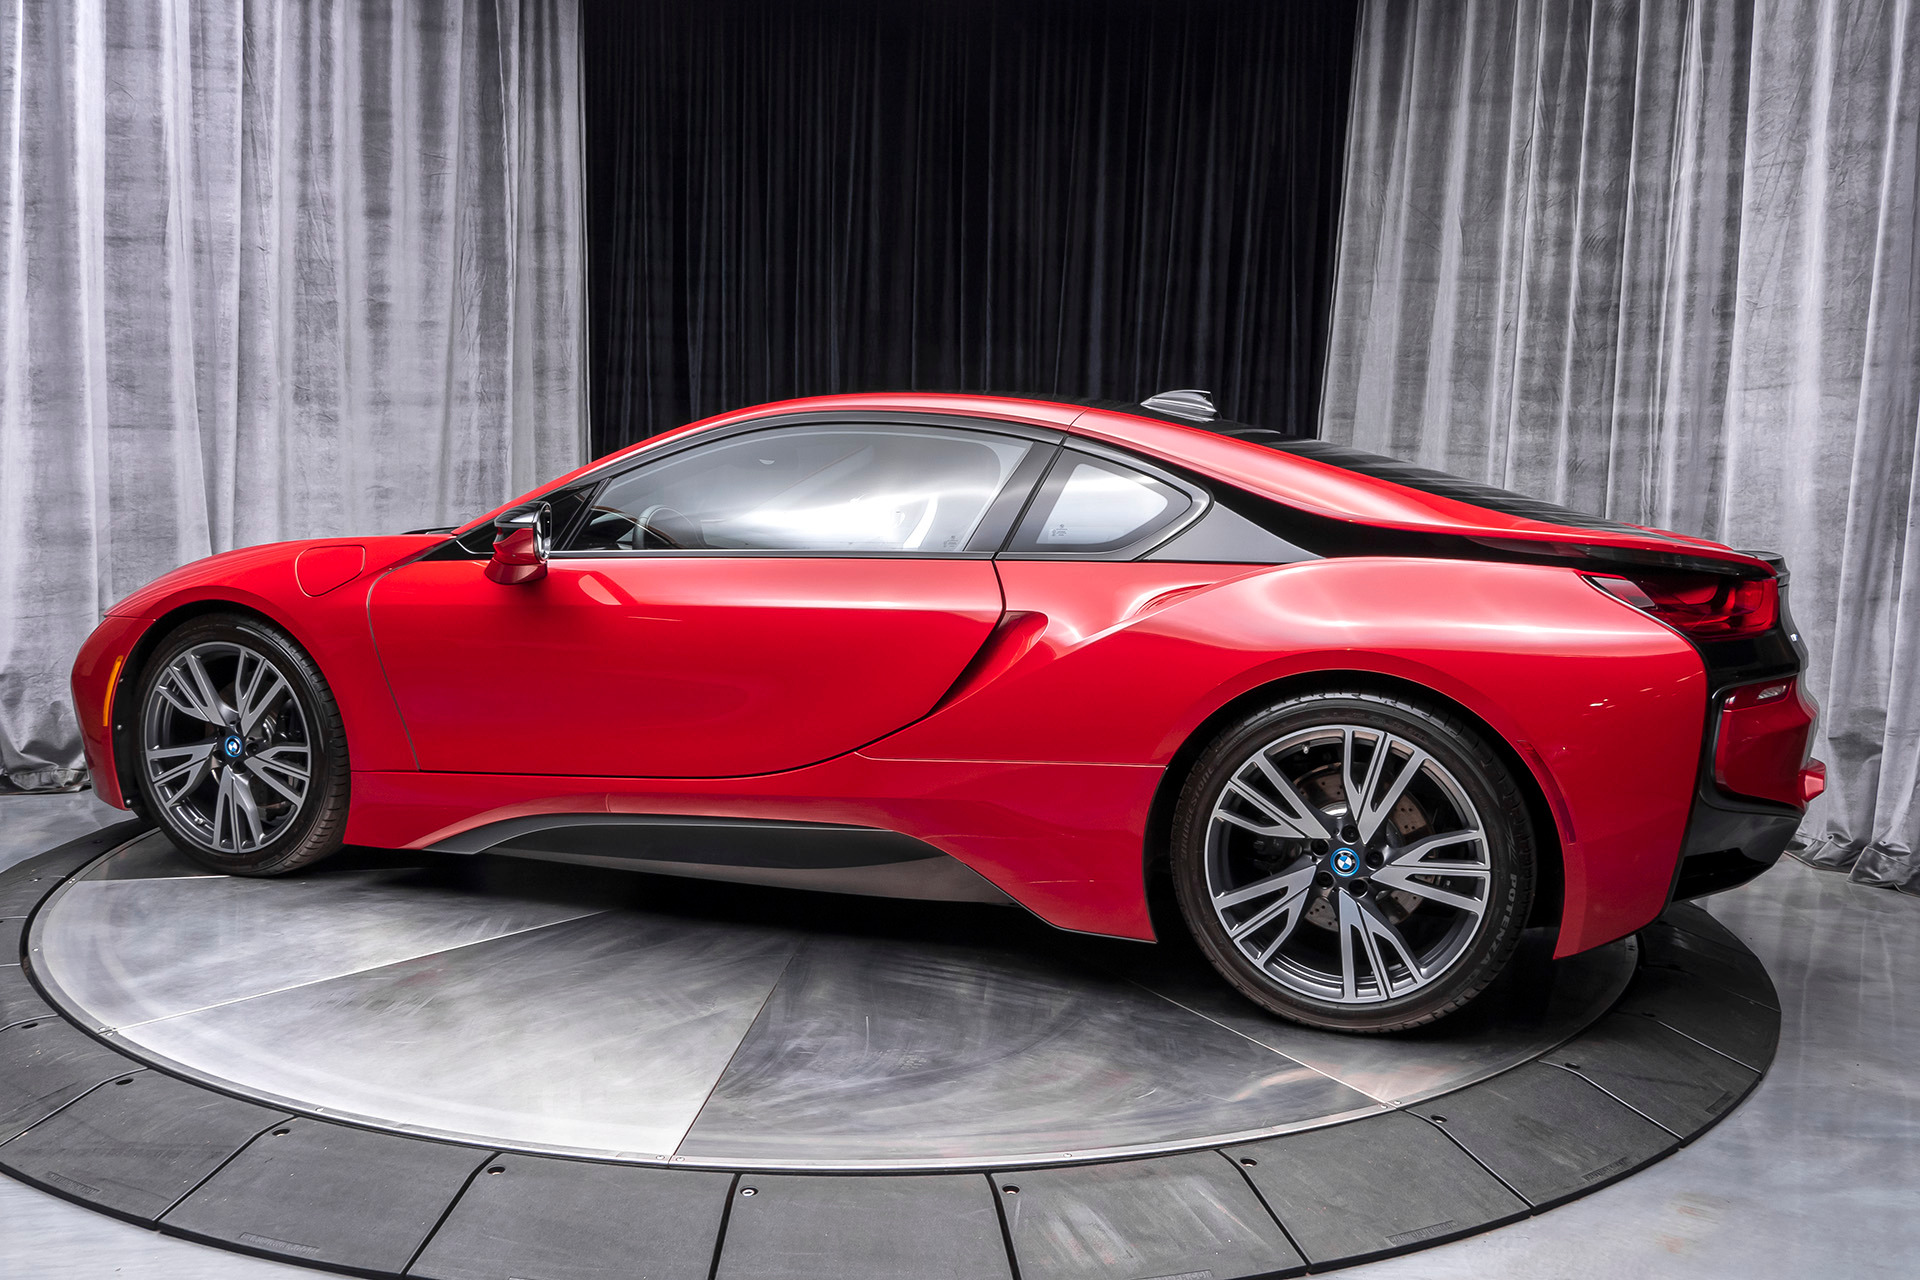 Used-2017-BMW-i8-Protonic-Red-Edition-Coupe-1-OF-100-IN-THE-US